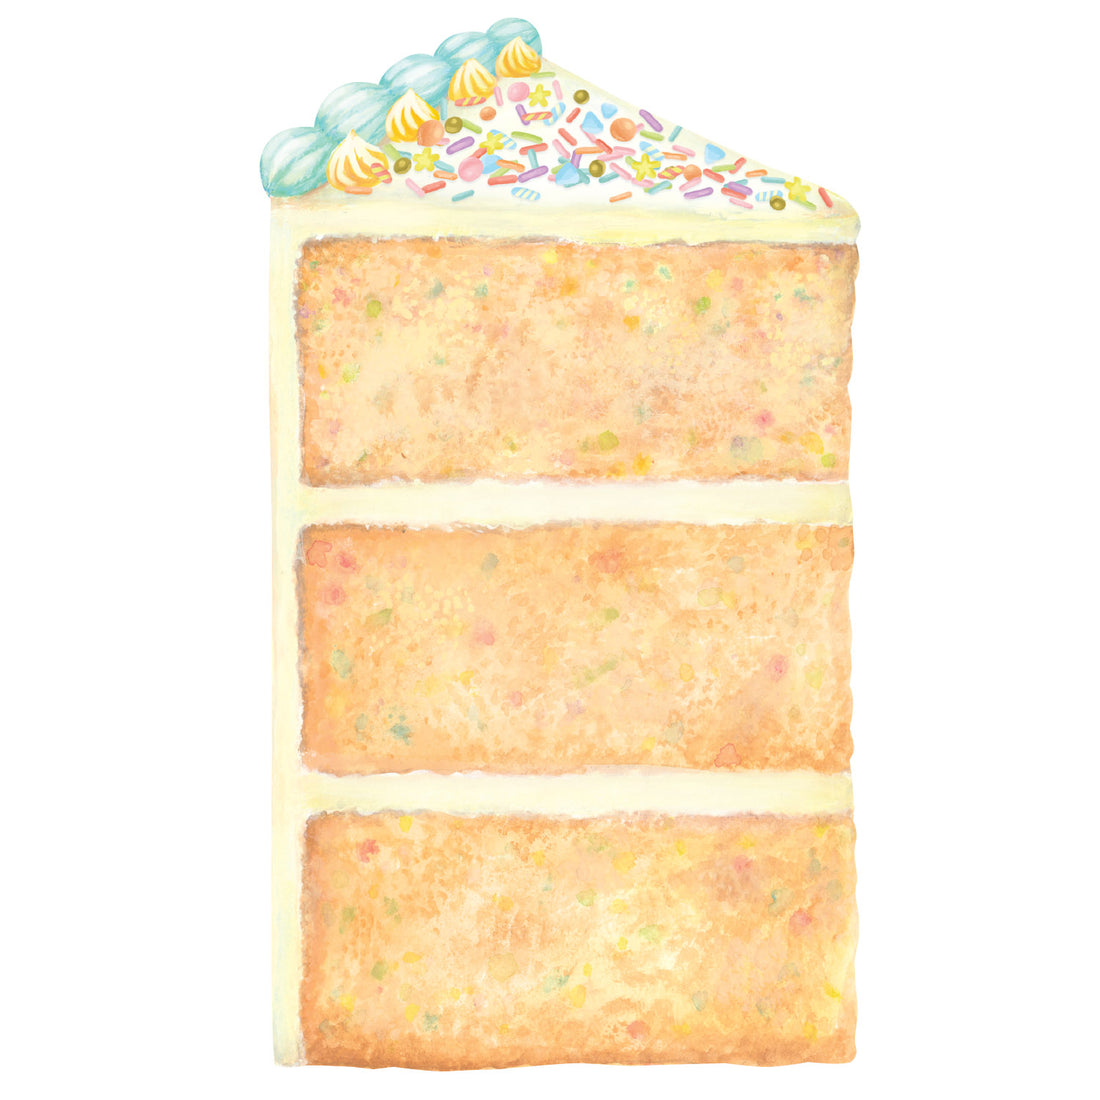 A die-cut illustration of a tall, three-layer yellow cake with cream frosting and colorful icing and sprinkles decorating the top.